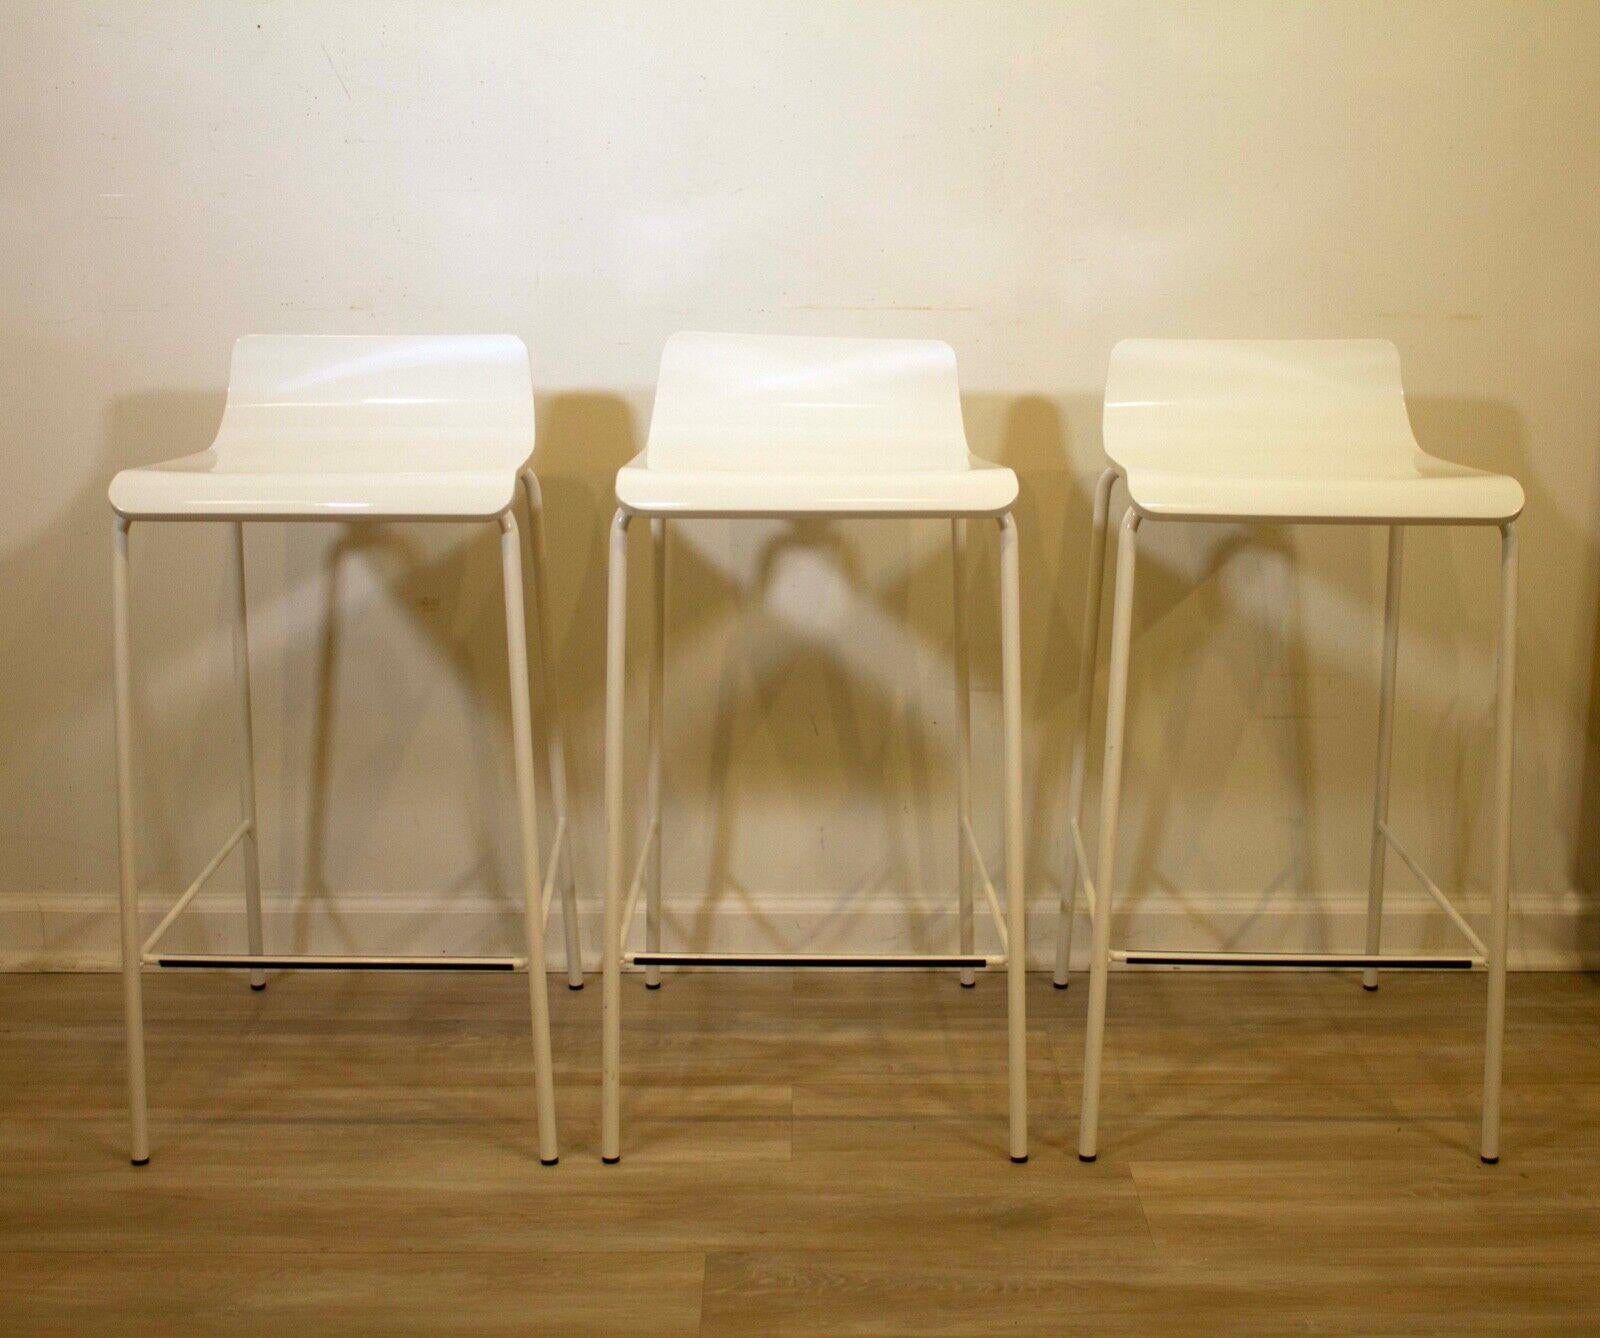 These sleek and stylish bar stools are the perfect addition to any modern kitchen or dining room. The white finish is both sophisticated and timeless and they feature a black foot rest. Perfect for any contemporary designed space! Some scruff marks,